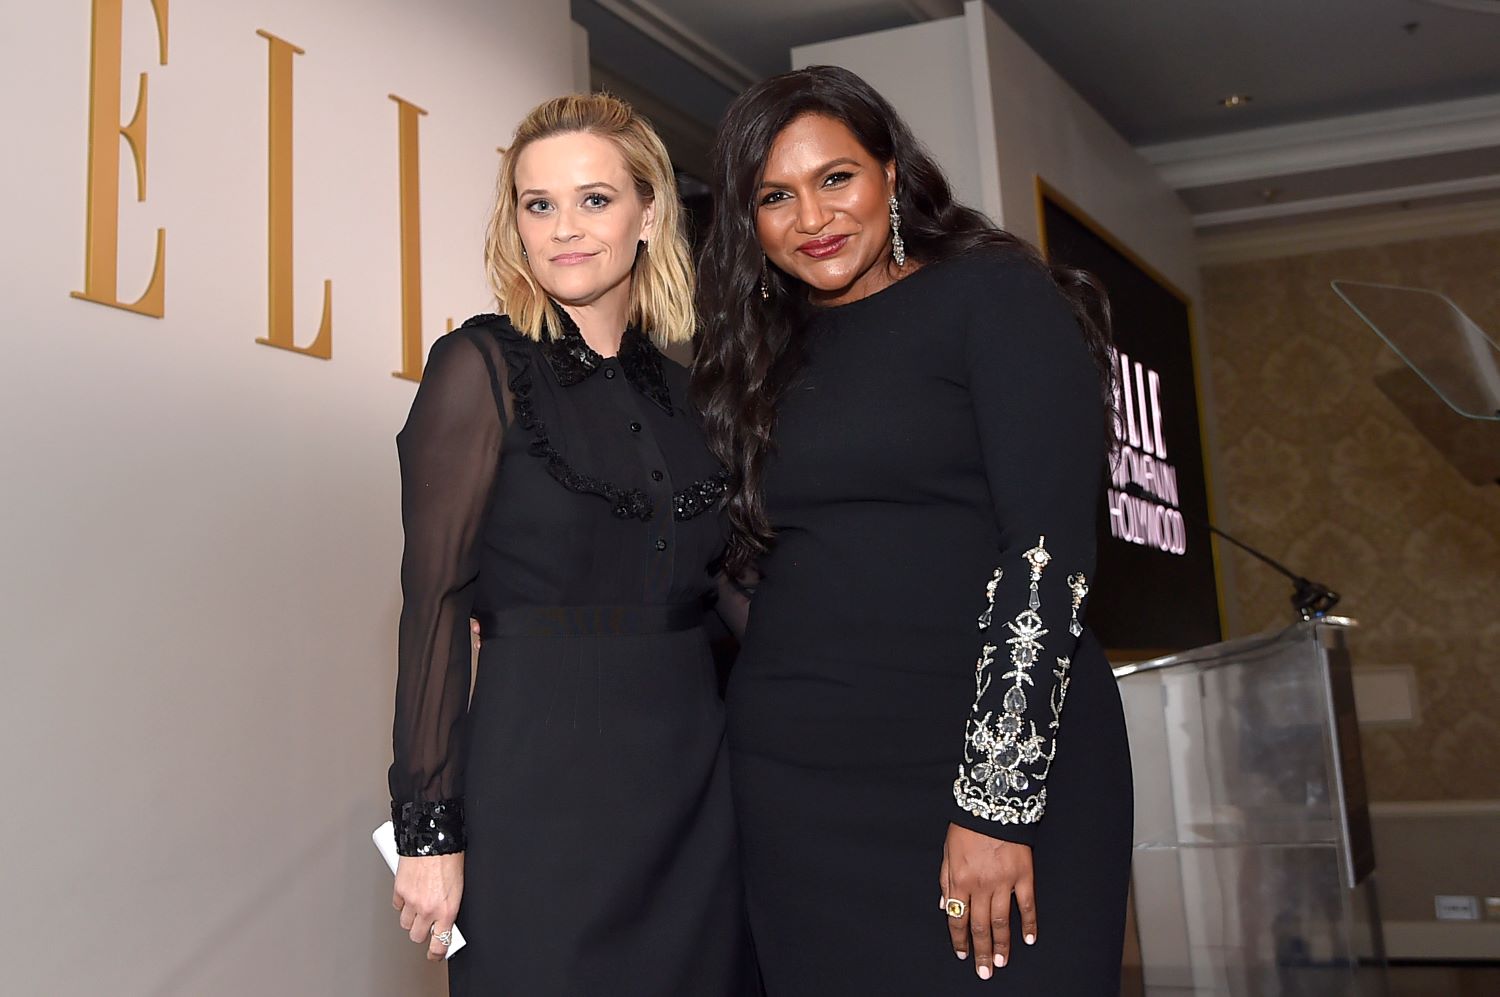 Reese Witherspoon and Mindy Kaling posing together both in black dresses